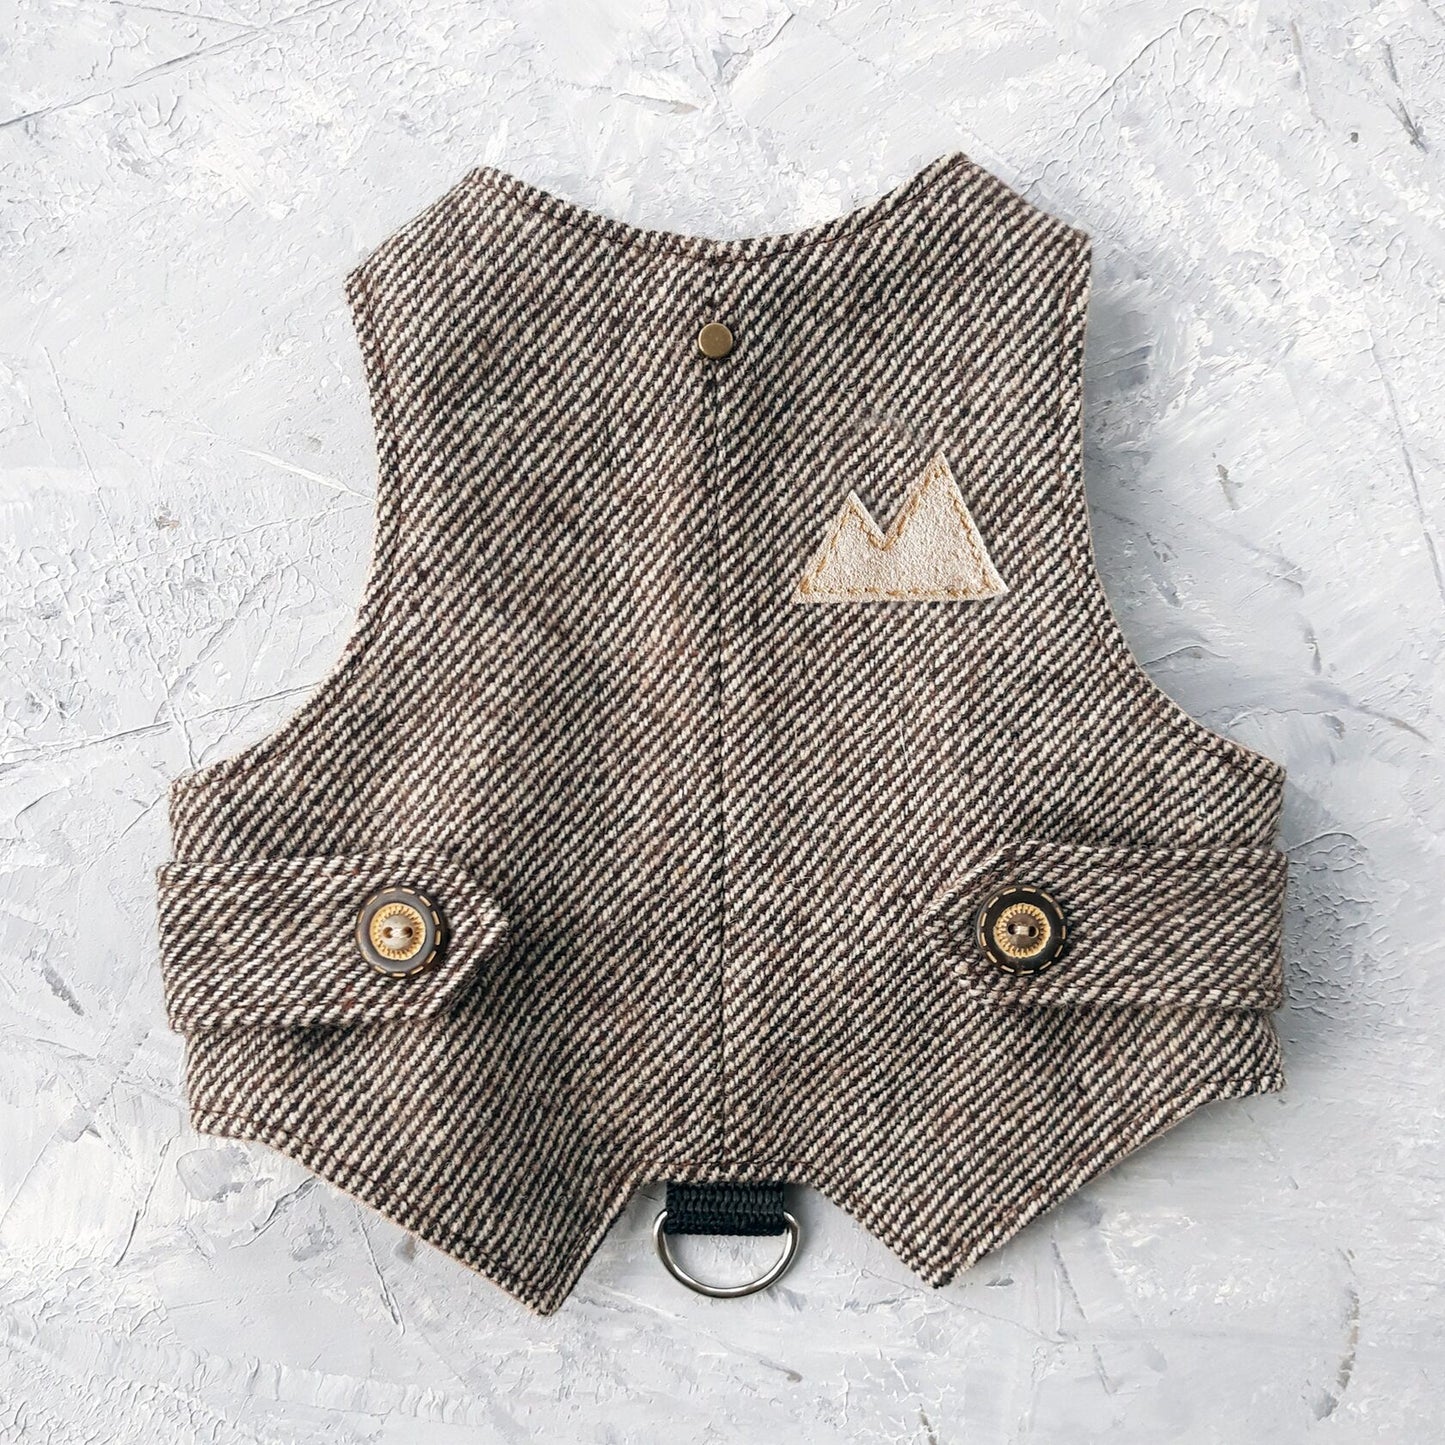 Difficult to escape tweed cat harness with the diagonal stripes pattern and patch. Personalization is available